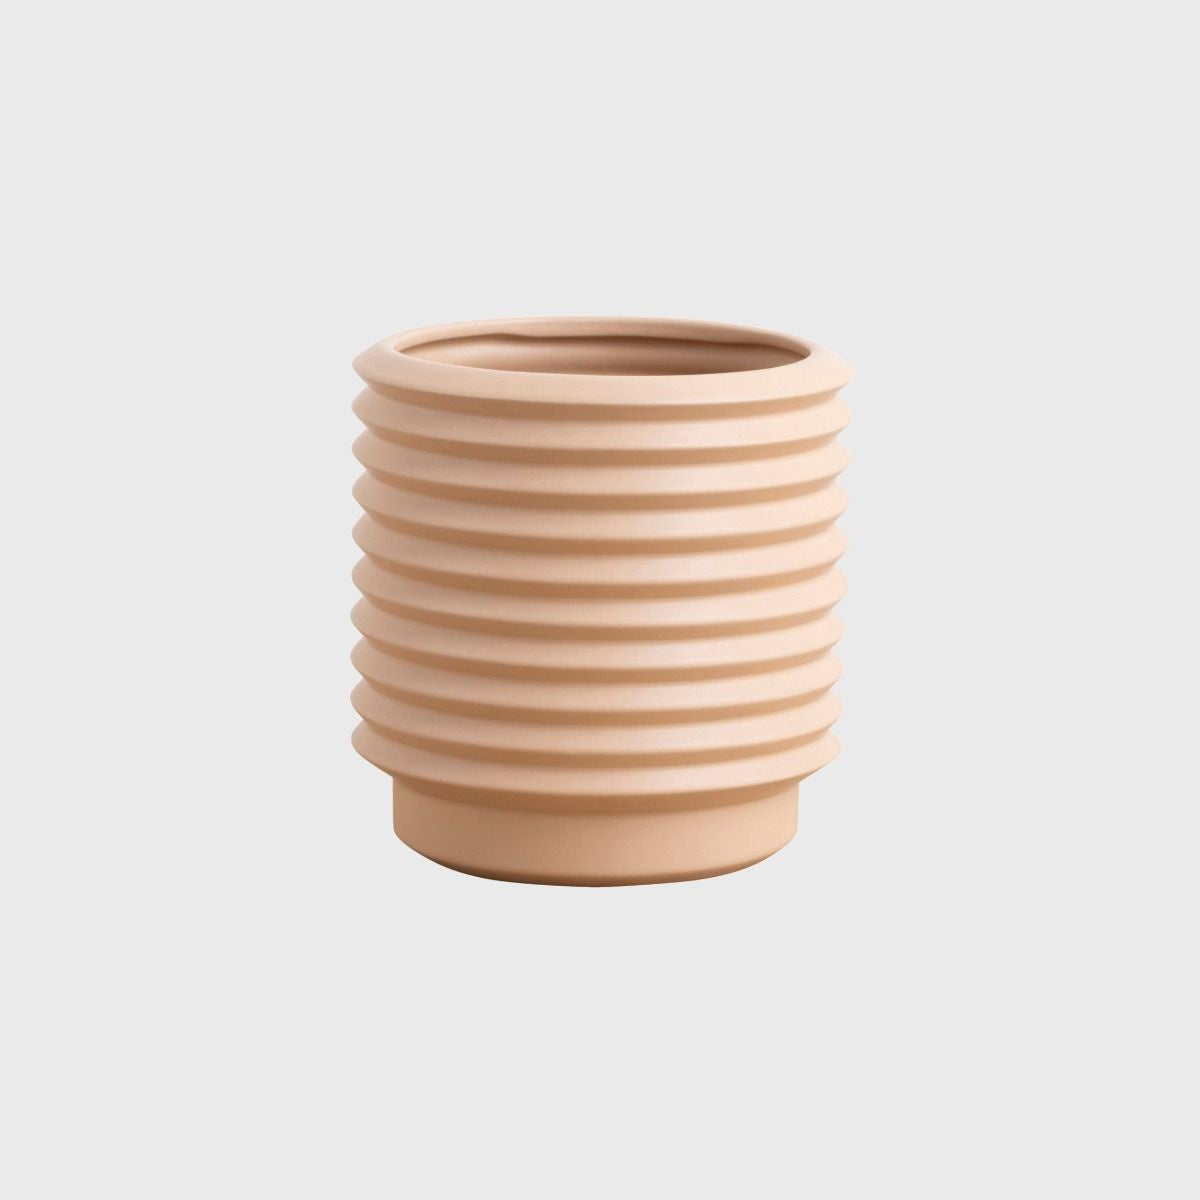 Potted | Berlin Planter - Large - Found My Way Invercargill